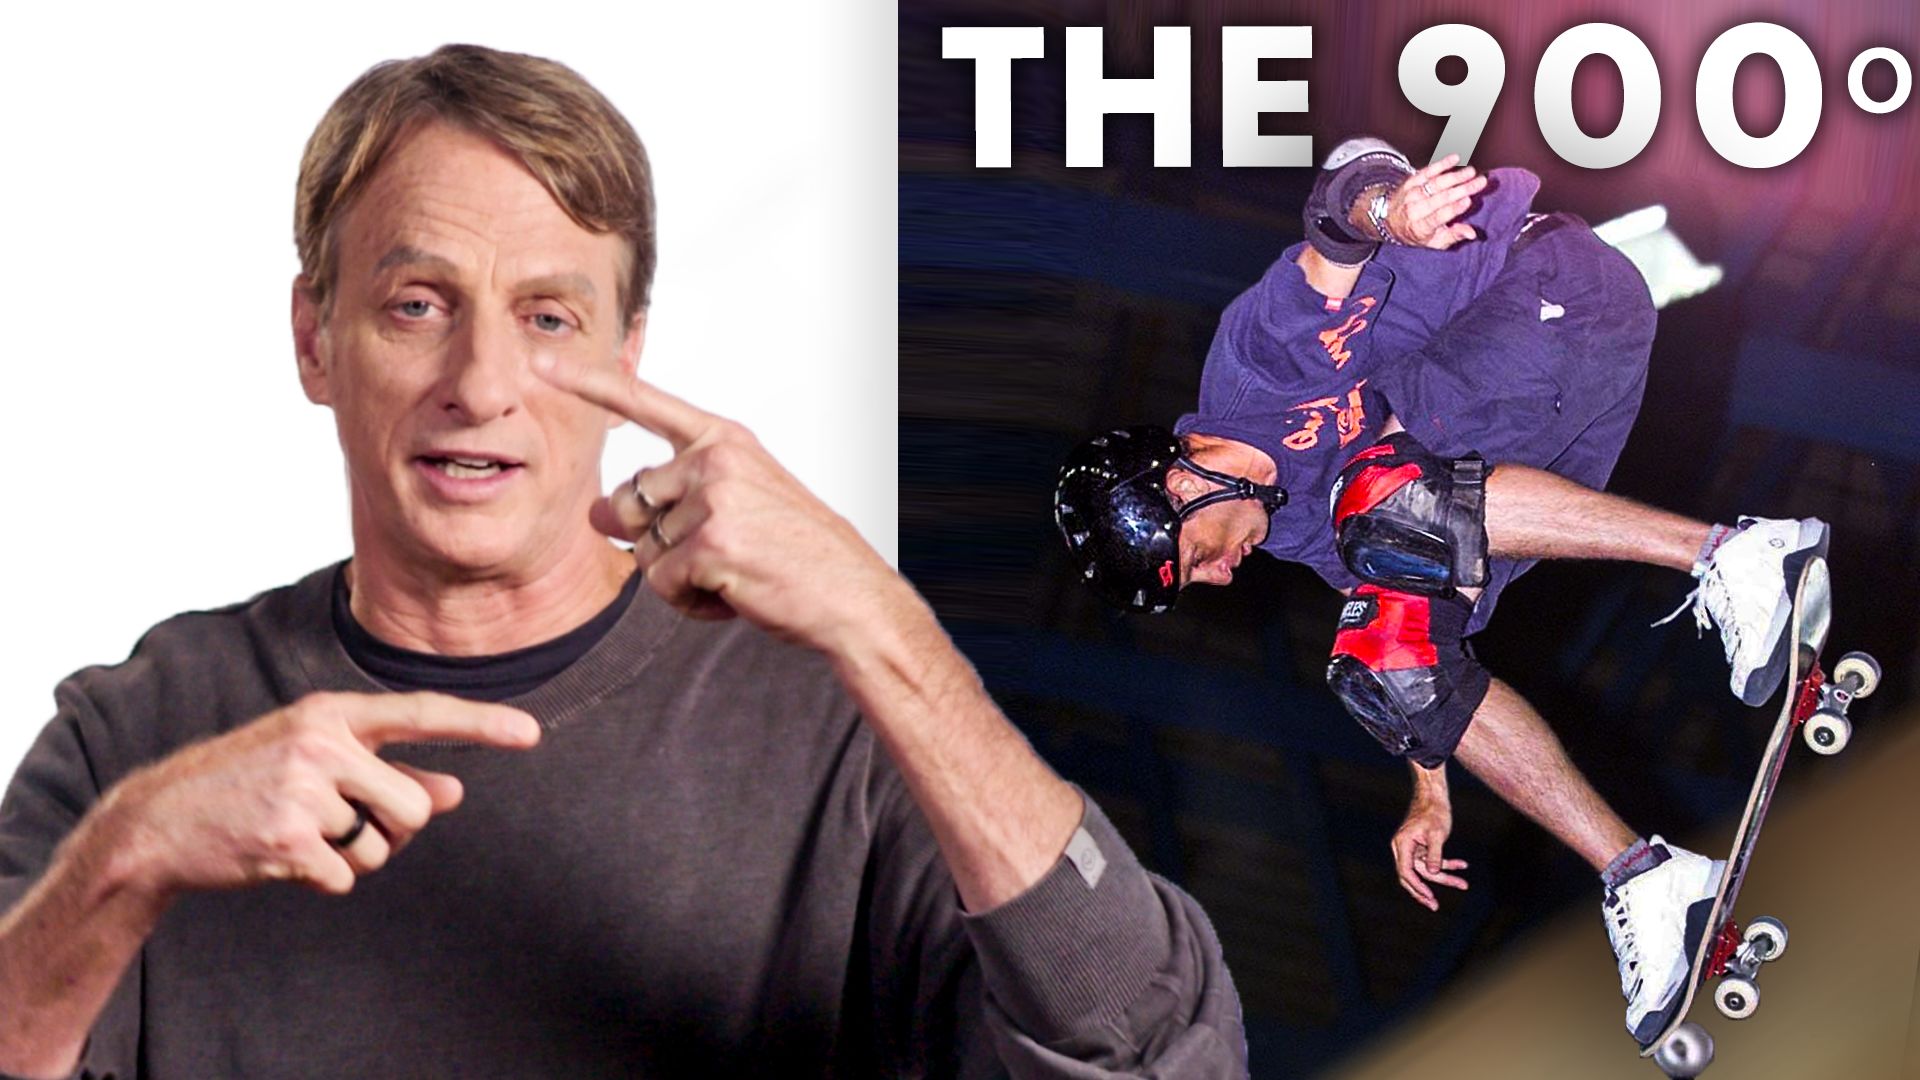 It inspired a generation': Tony Hawk on how the Pro Skater video